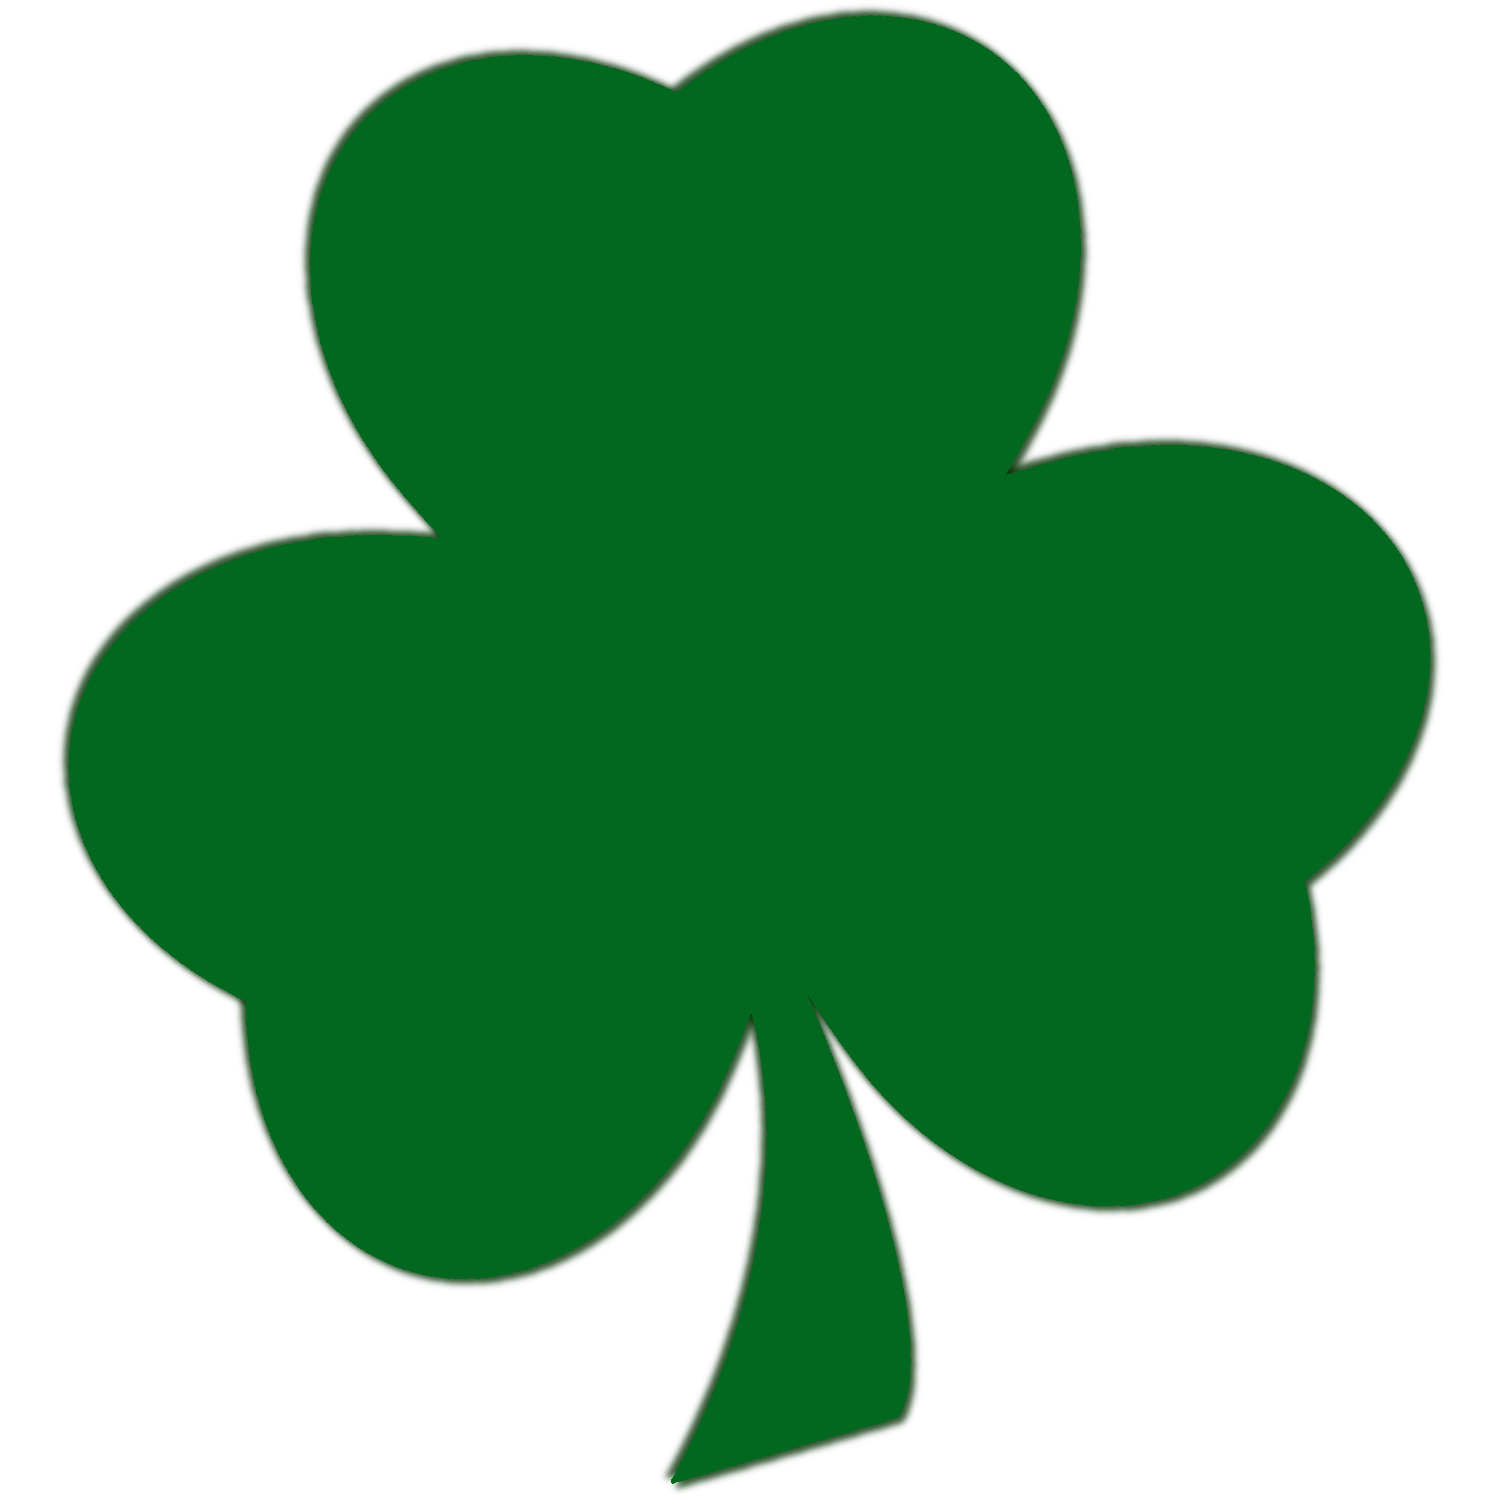 Happy Saint Patrick's Day 2015 Clover Images For Irish People